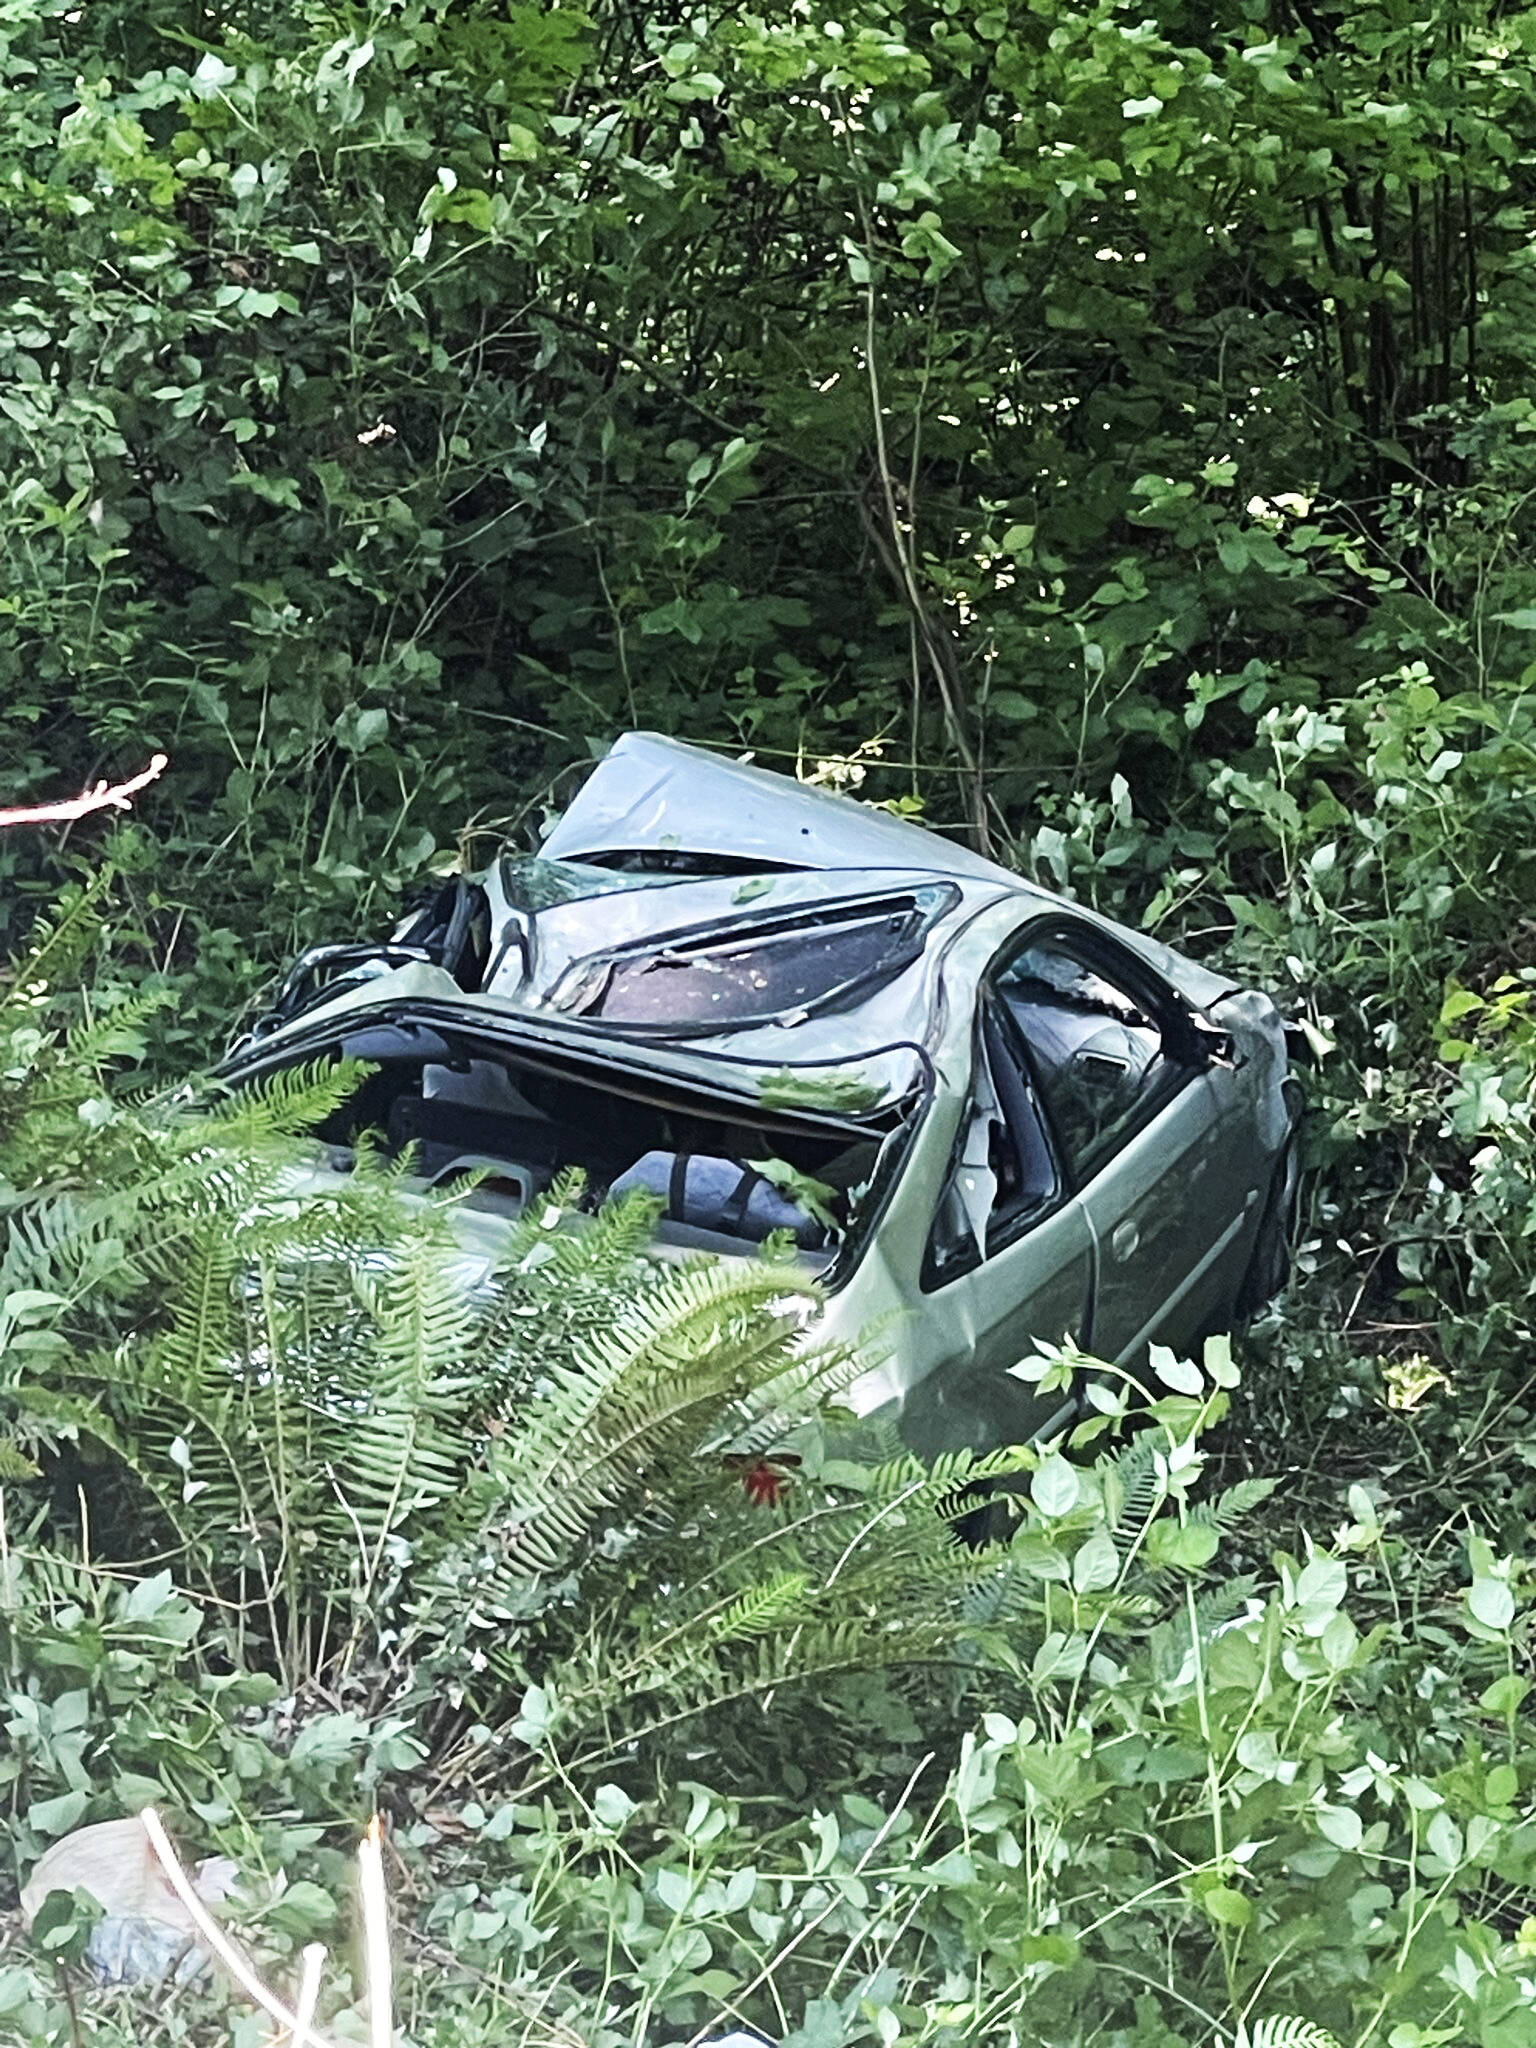 A driver had only minor injuries after a car went down a 75-foot embankment on Friday, May 19 along South 212th Street in Kent. COURTESY PHOTO, Puget Sound Fire